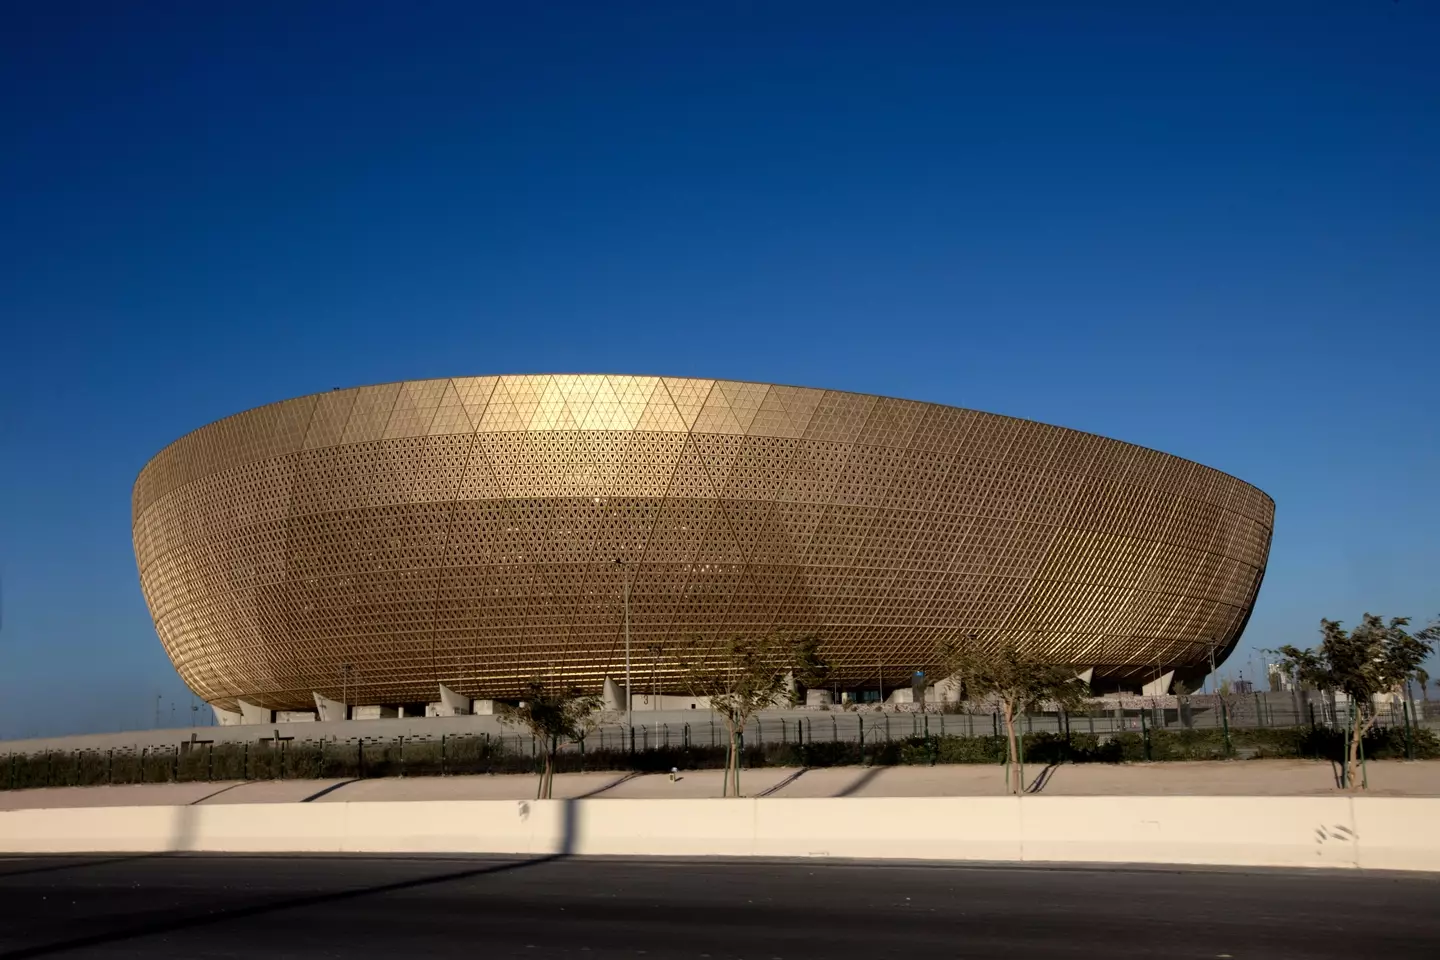 The 80,000 seater Lusail stadium will host the 2022 World Cup final in Qatar.